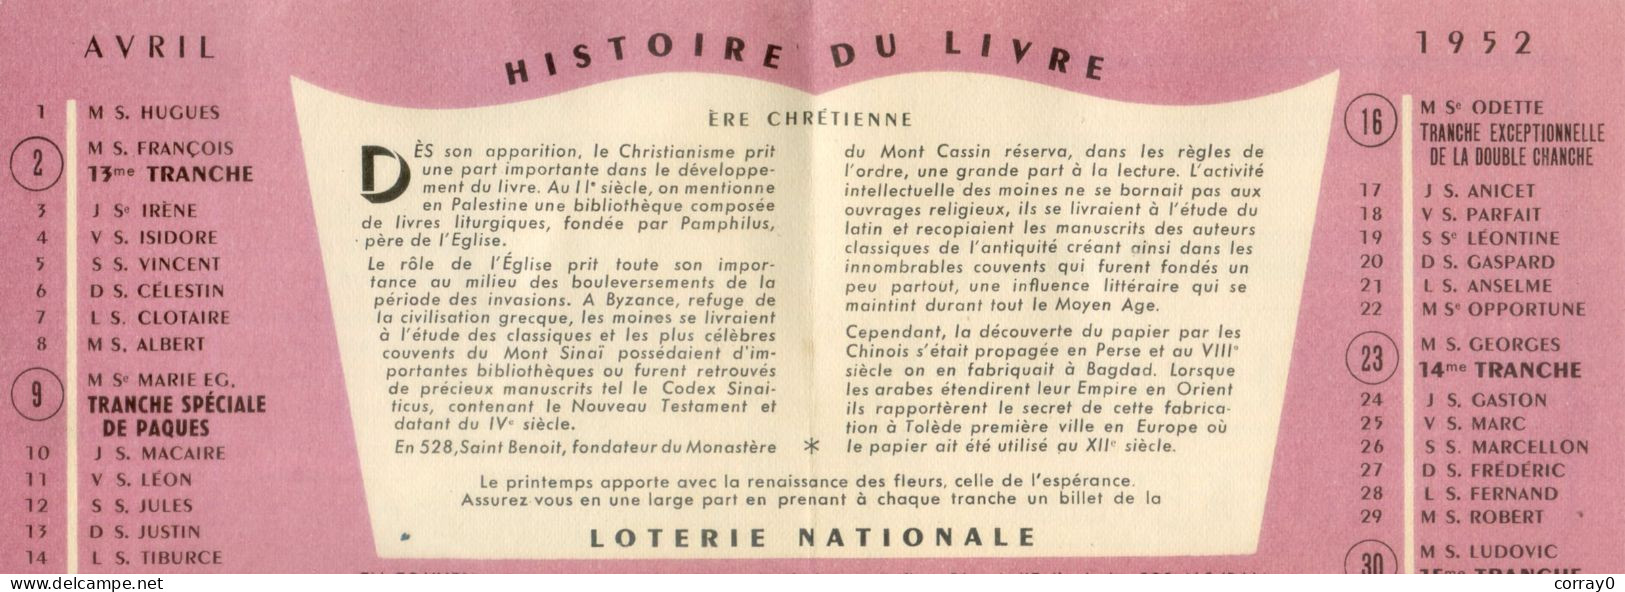 LOTERIE NATIONALE. Calendrier Avril 1952 - Lottery Tickets